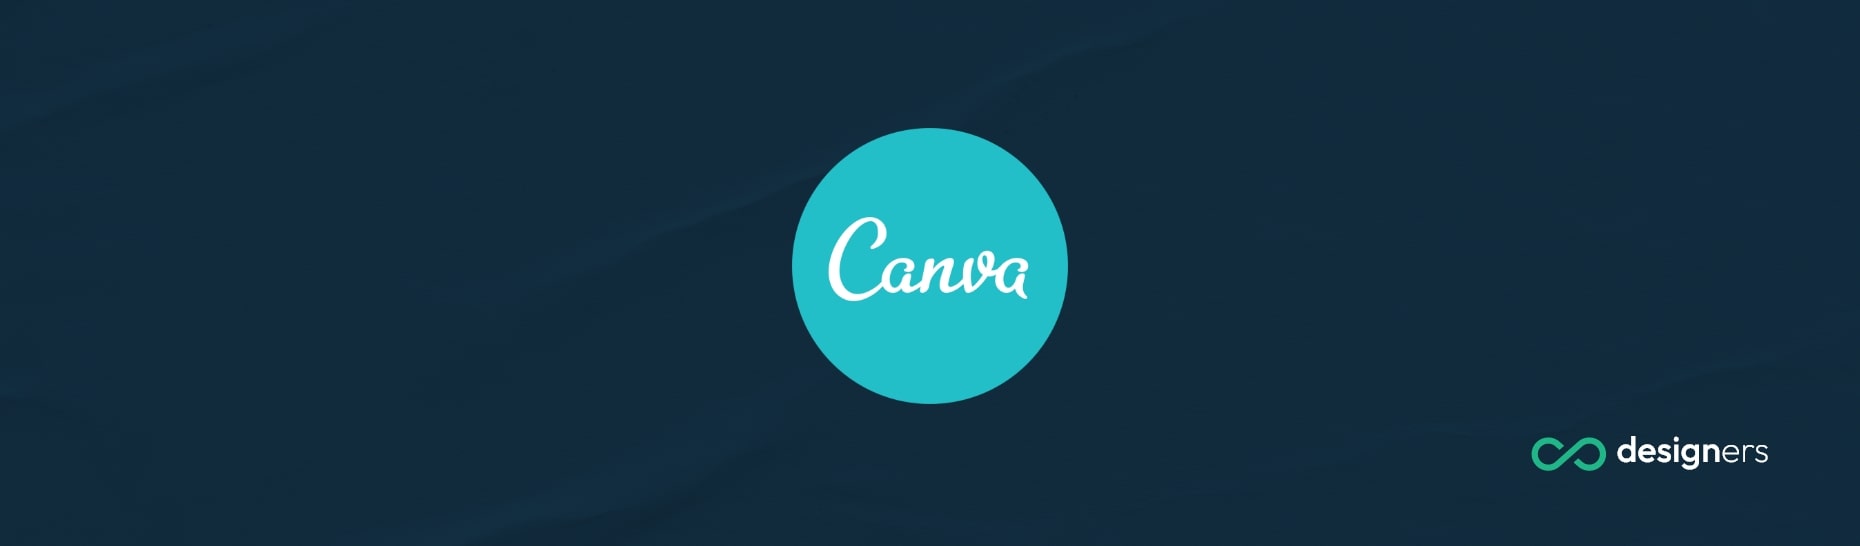 Where Is the Resize Button on Canva?